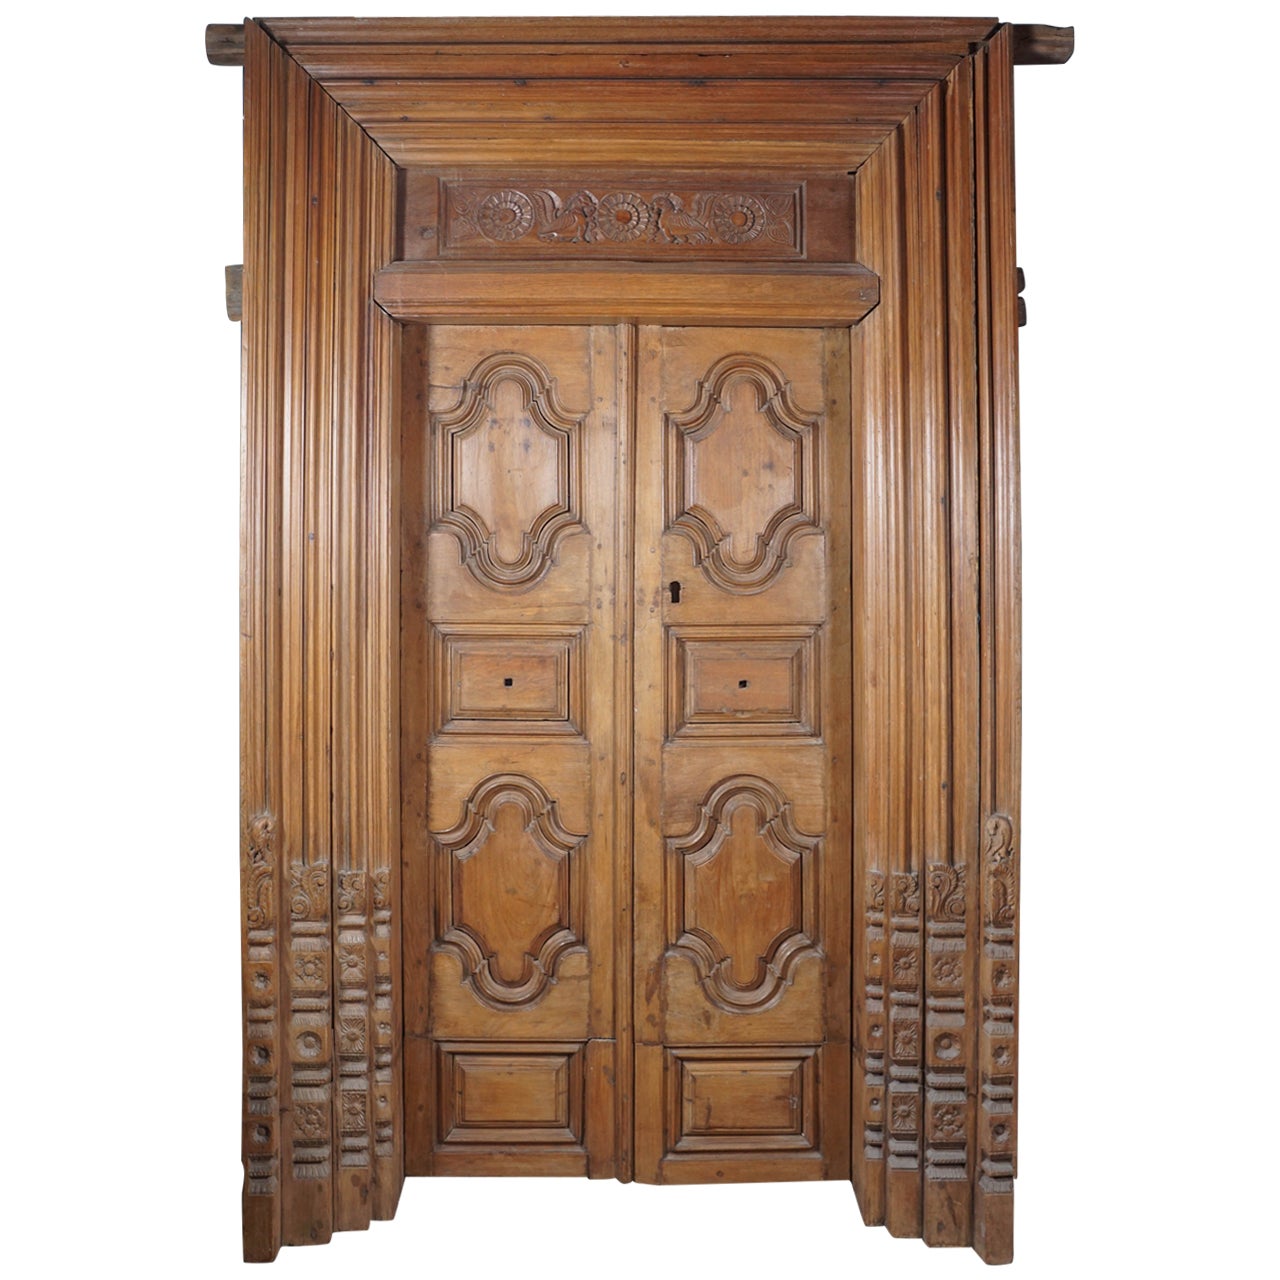 19th Century Hand-Carved Teak Wood Doors For Sale